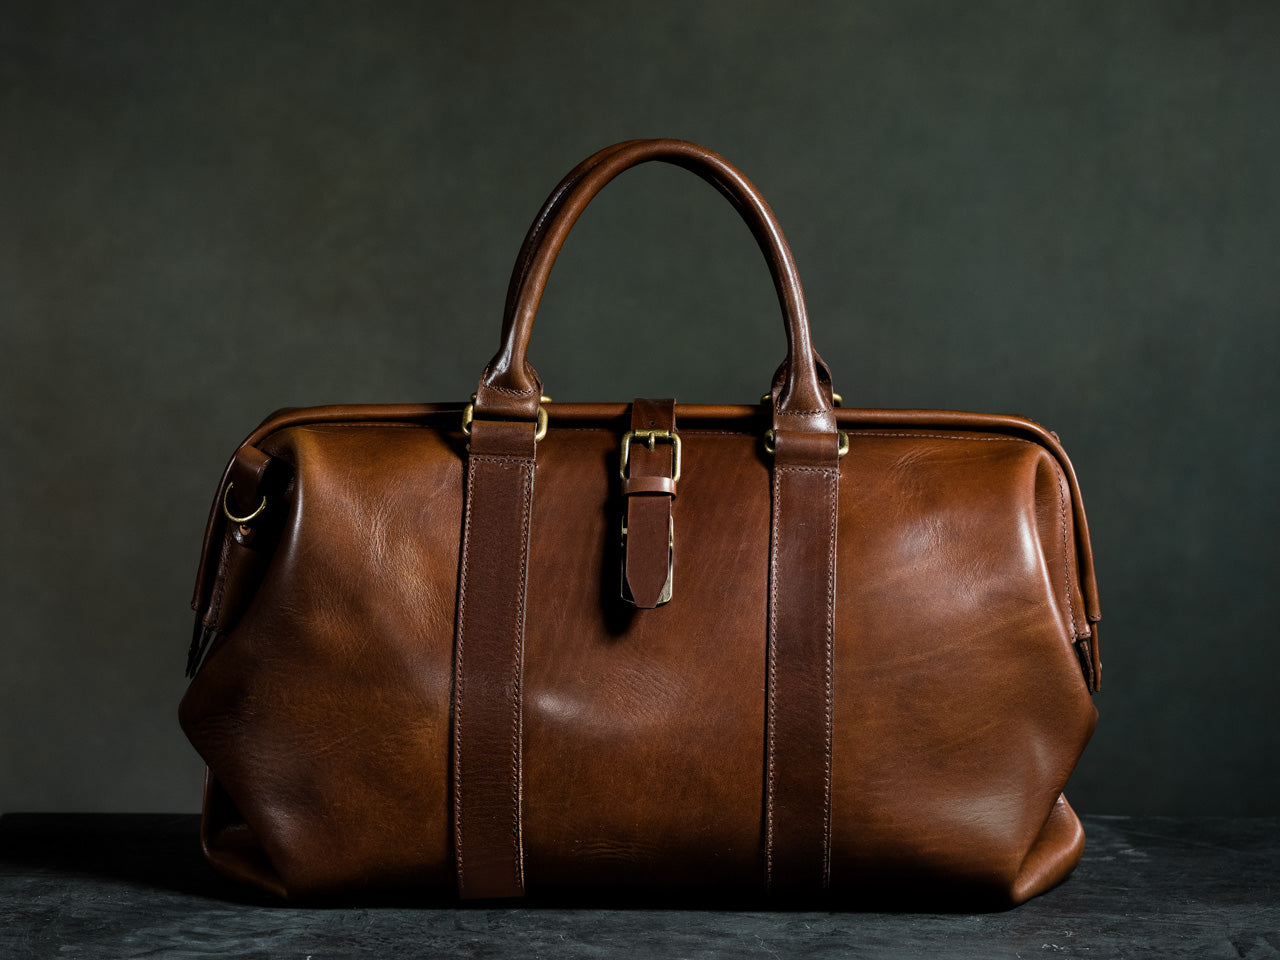 Pad & Quill Debuts the Gladstone Duffle Bag and Briefcase